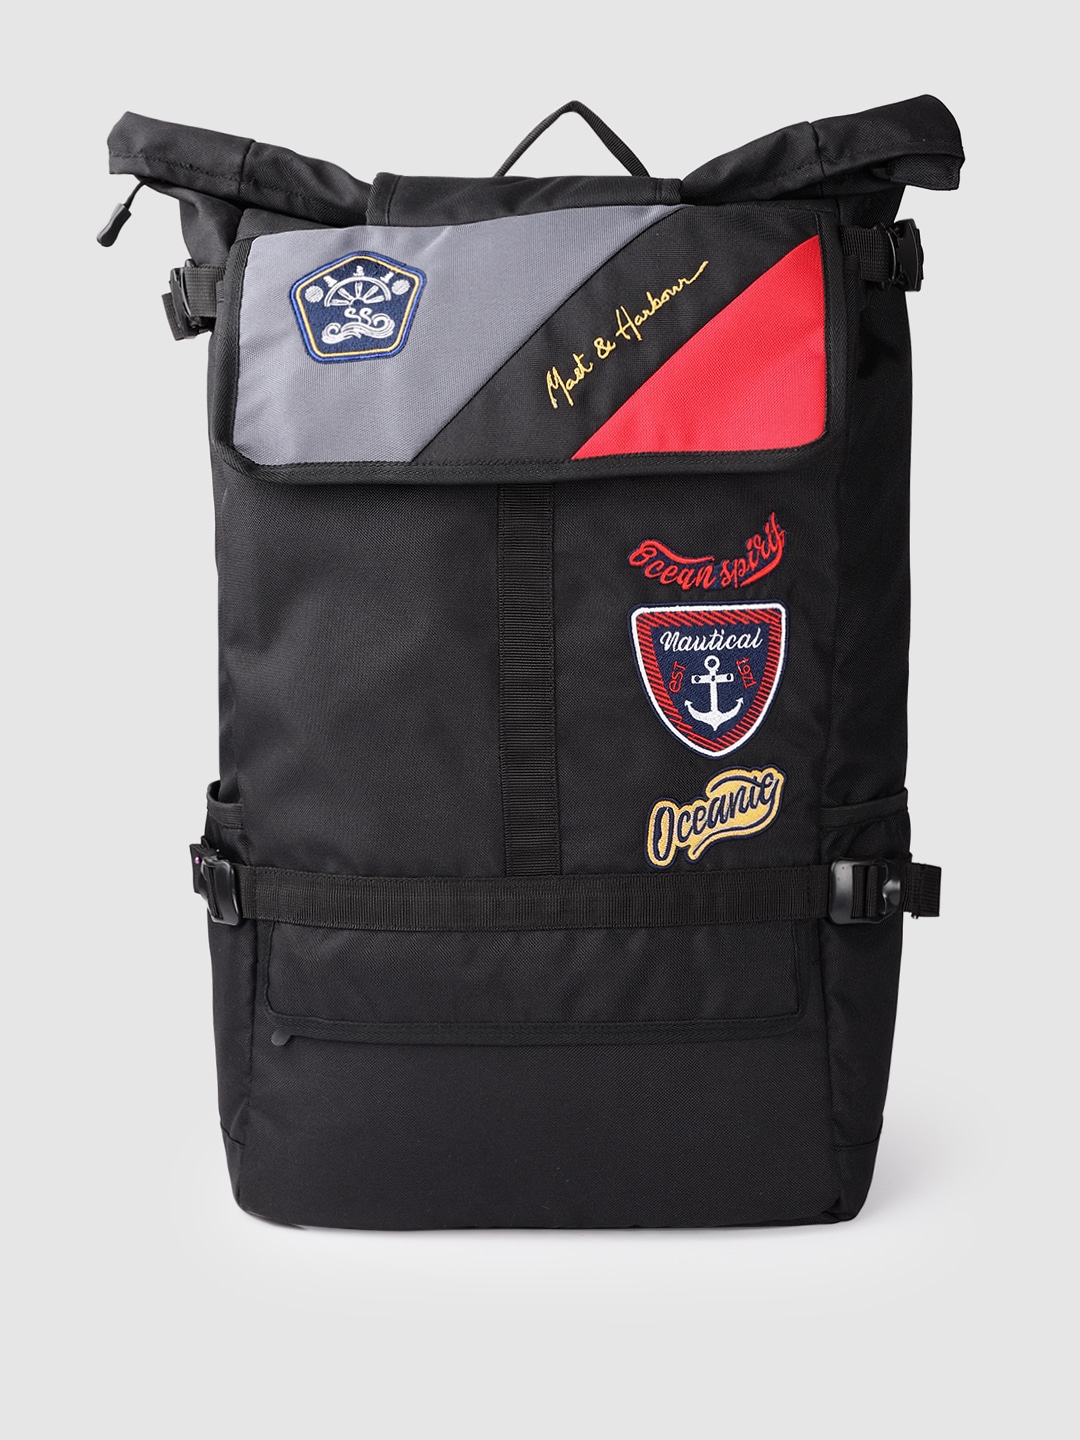 Mast & Harbour Unisex Black & Red Solid Backpack 21.4 L Price in India